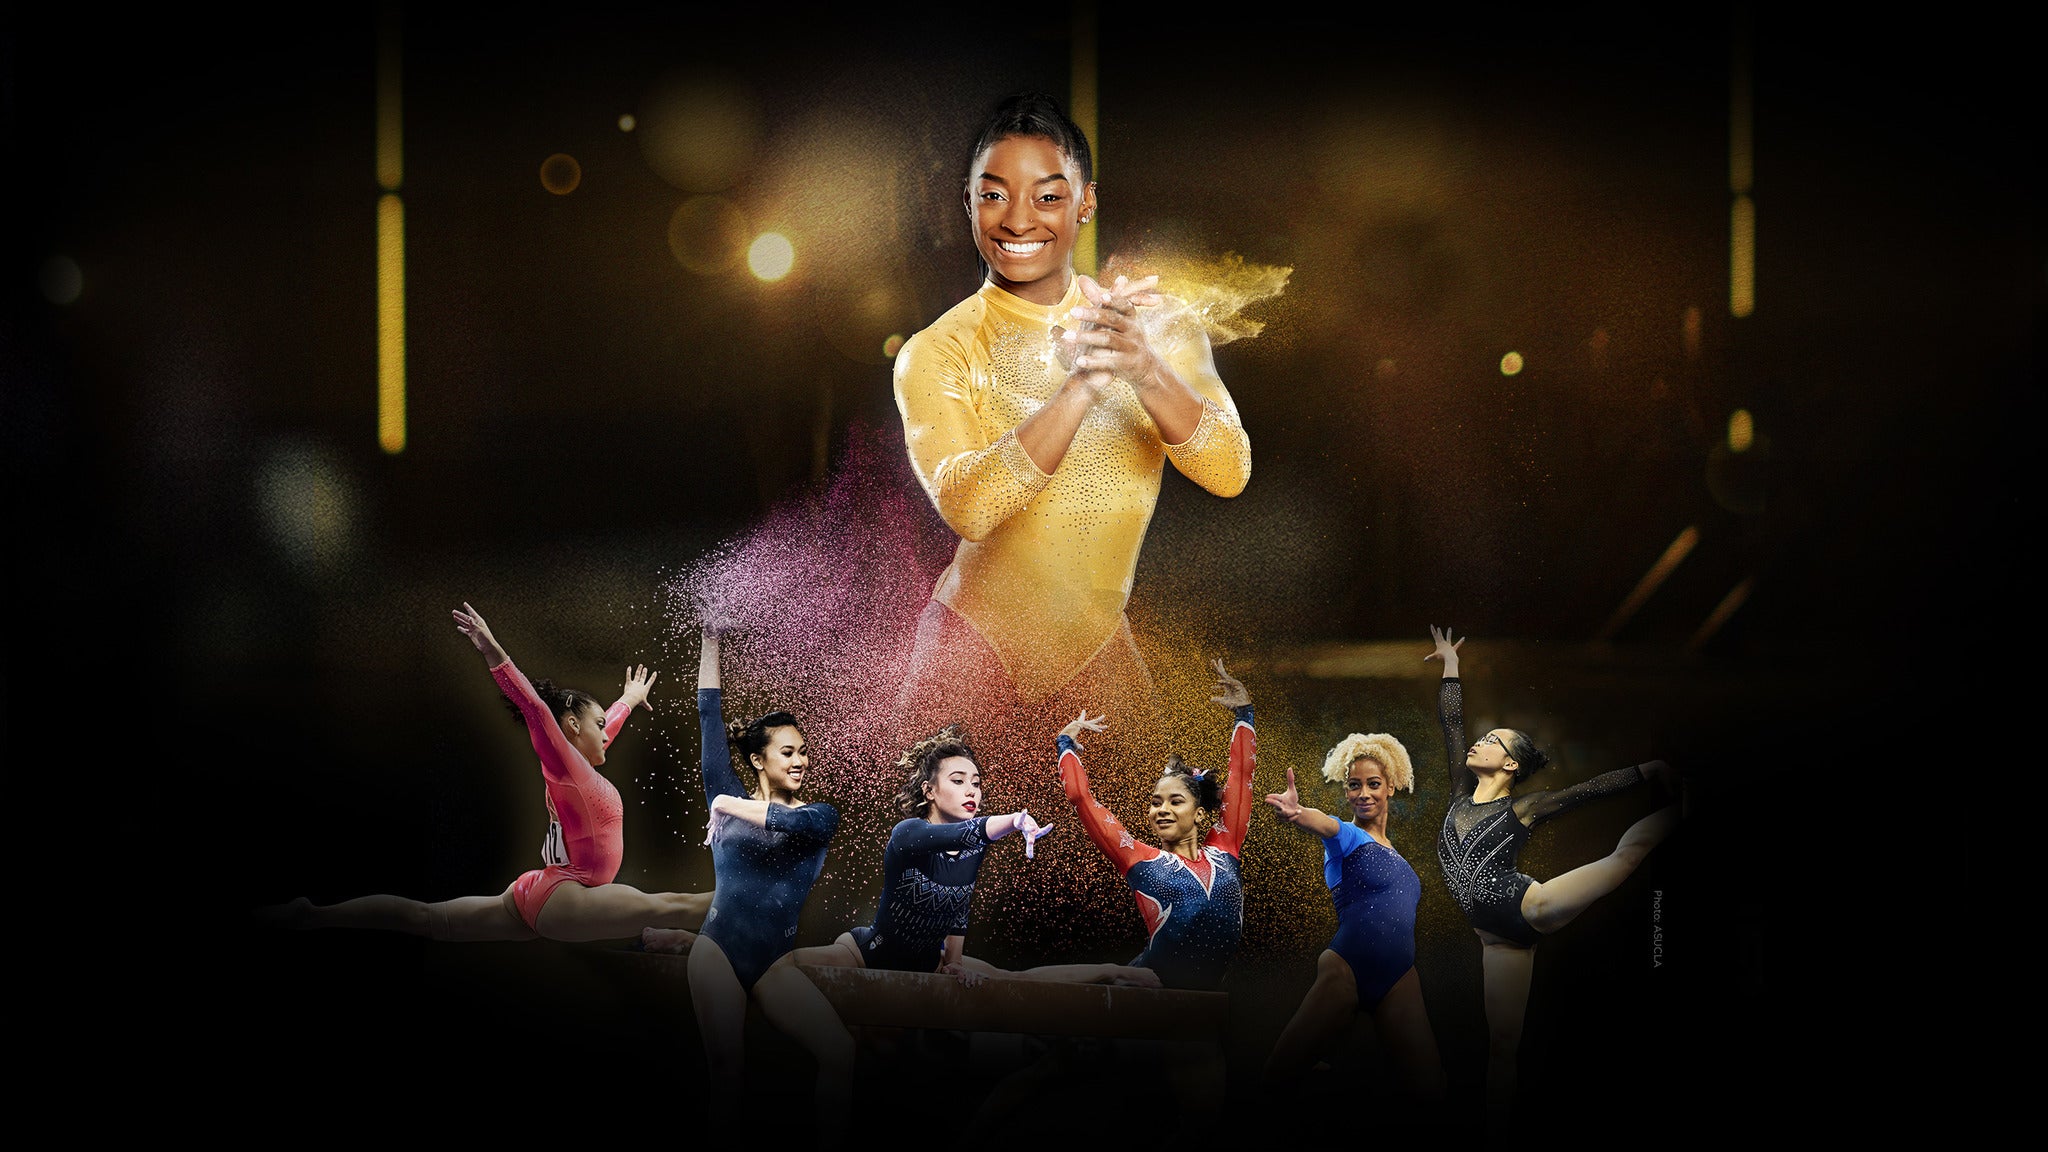 G.O.A.T. Gold Over America Tour Starring Simone Biles in Boise promo photo for Official Platinum presale offer code